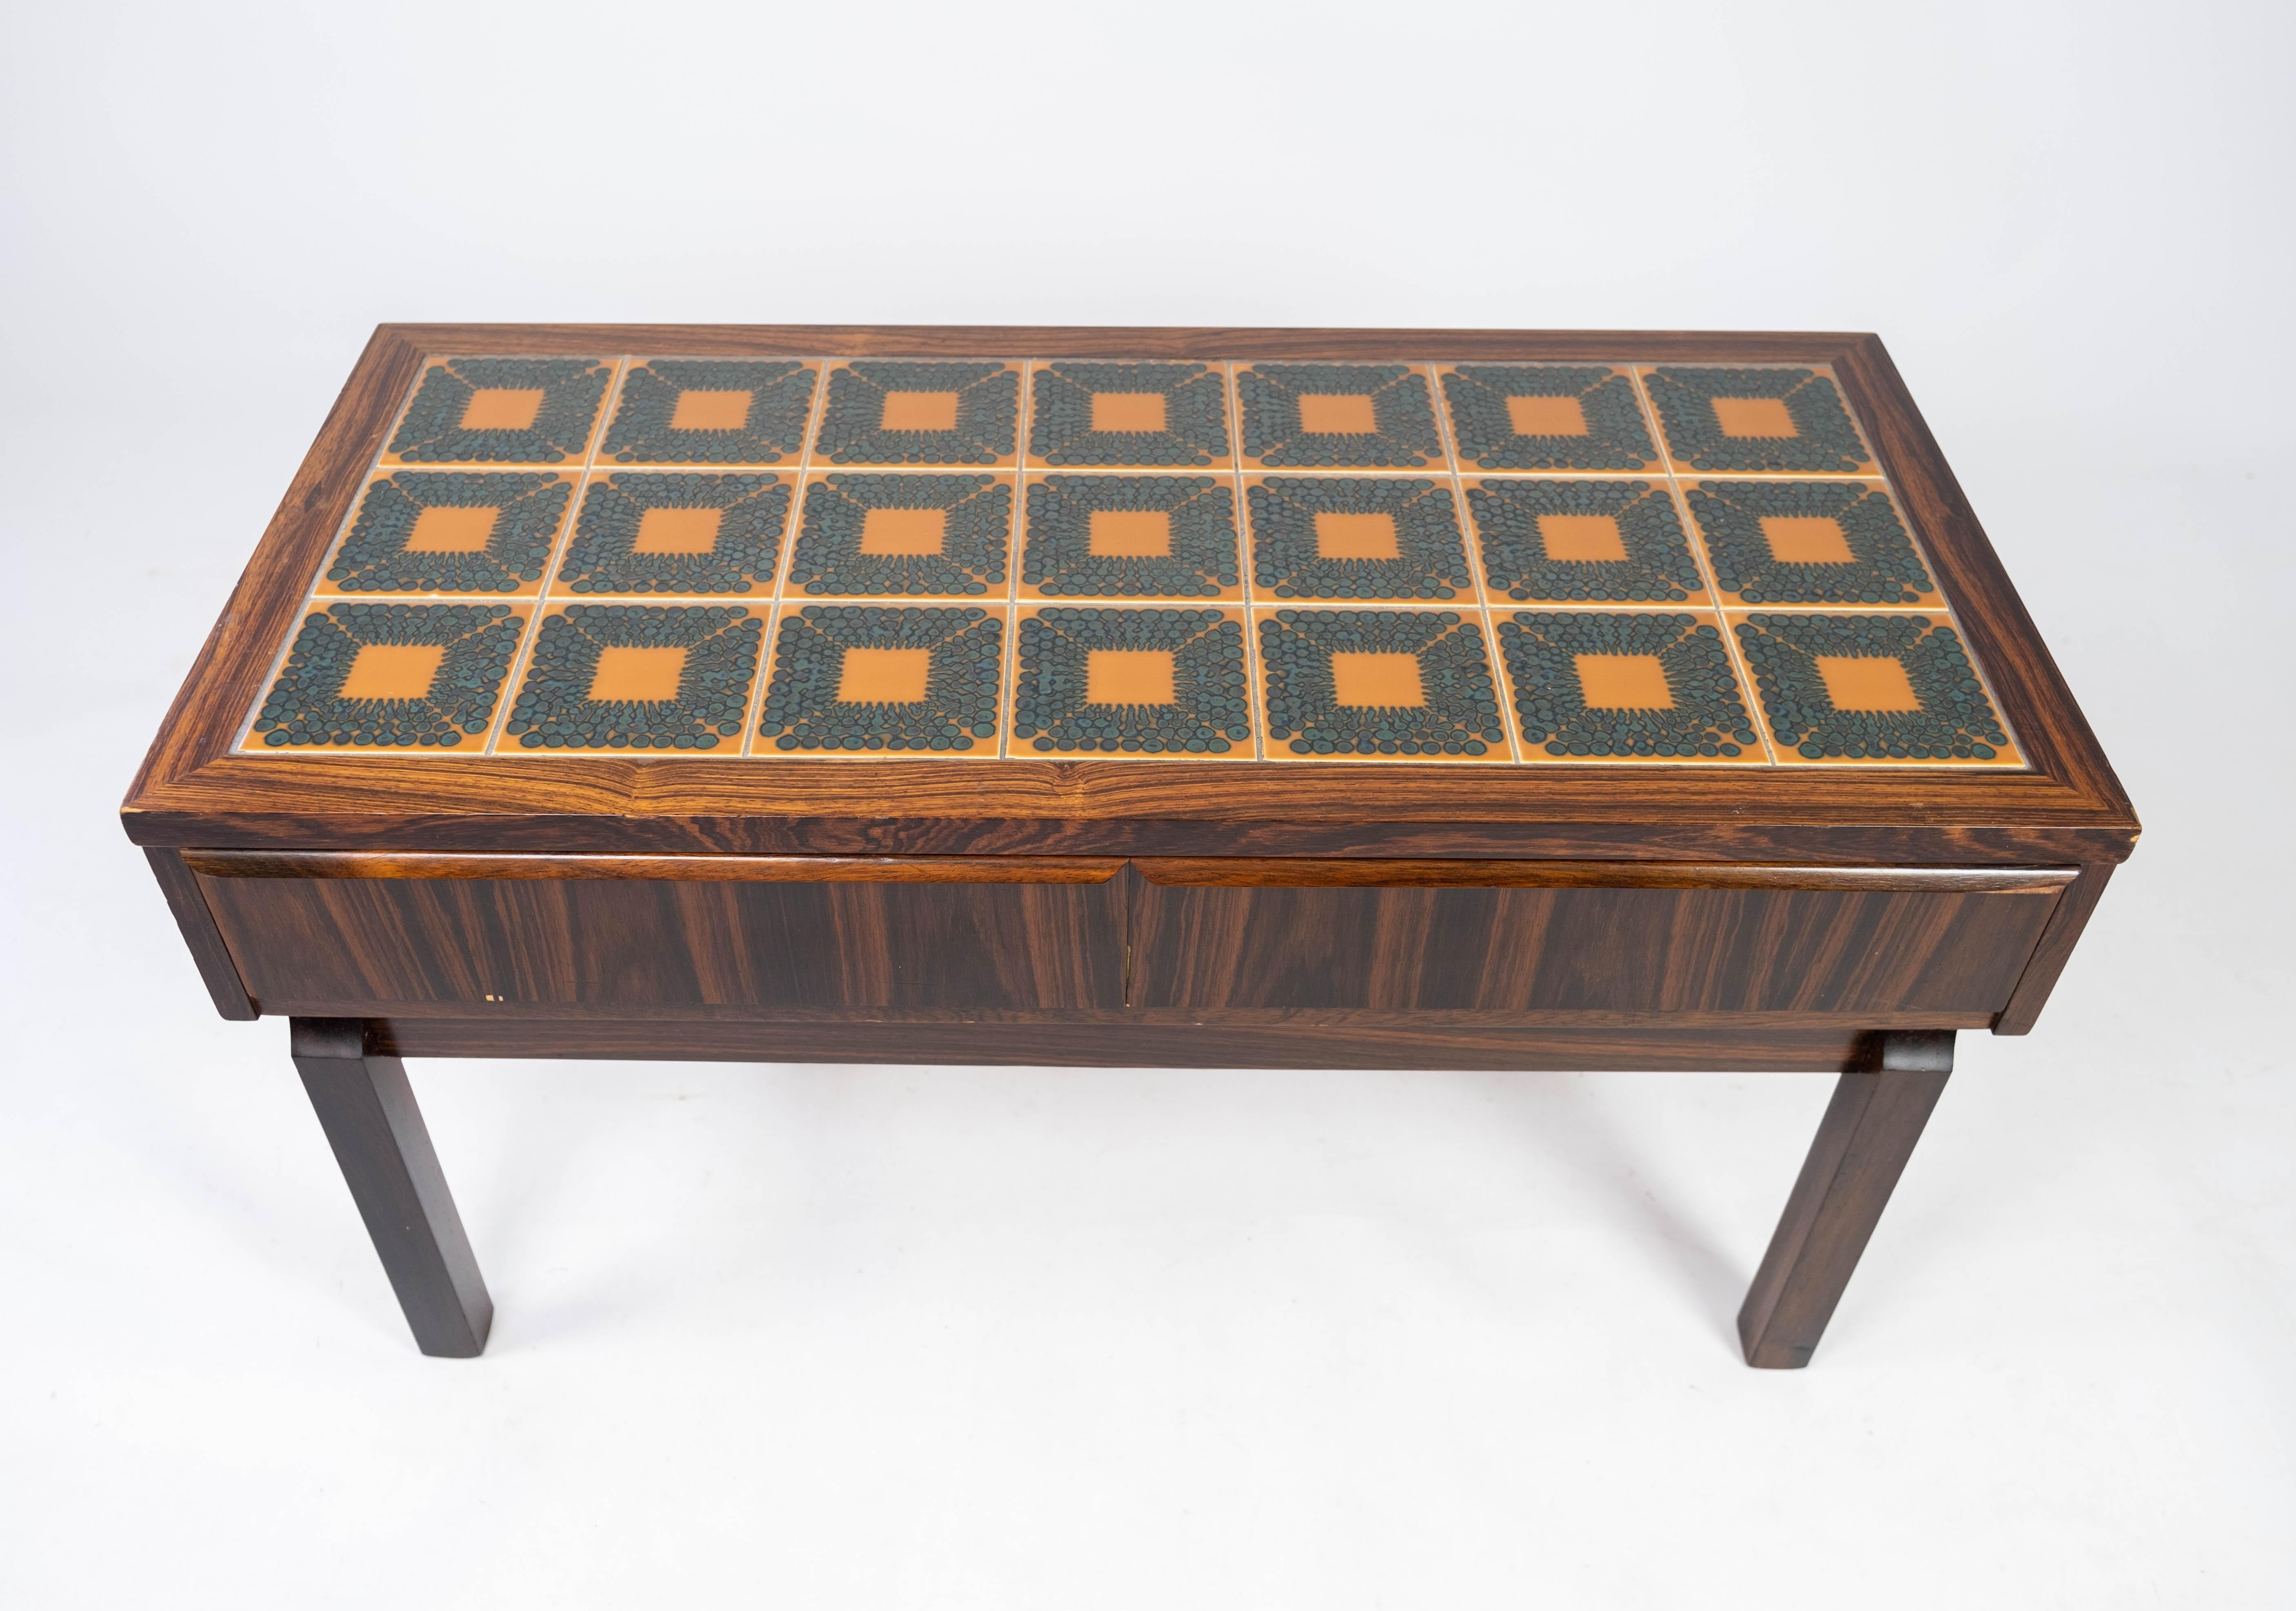 Scandinavian Modern Low Chest in Rosewood and Tiles, of Danish Design from the 1960s For Sale